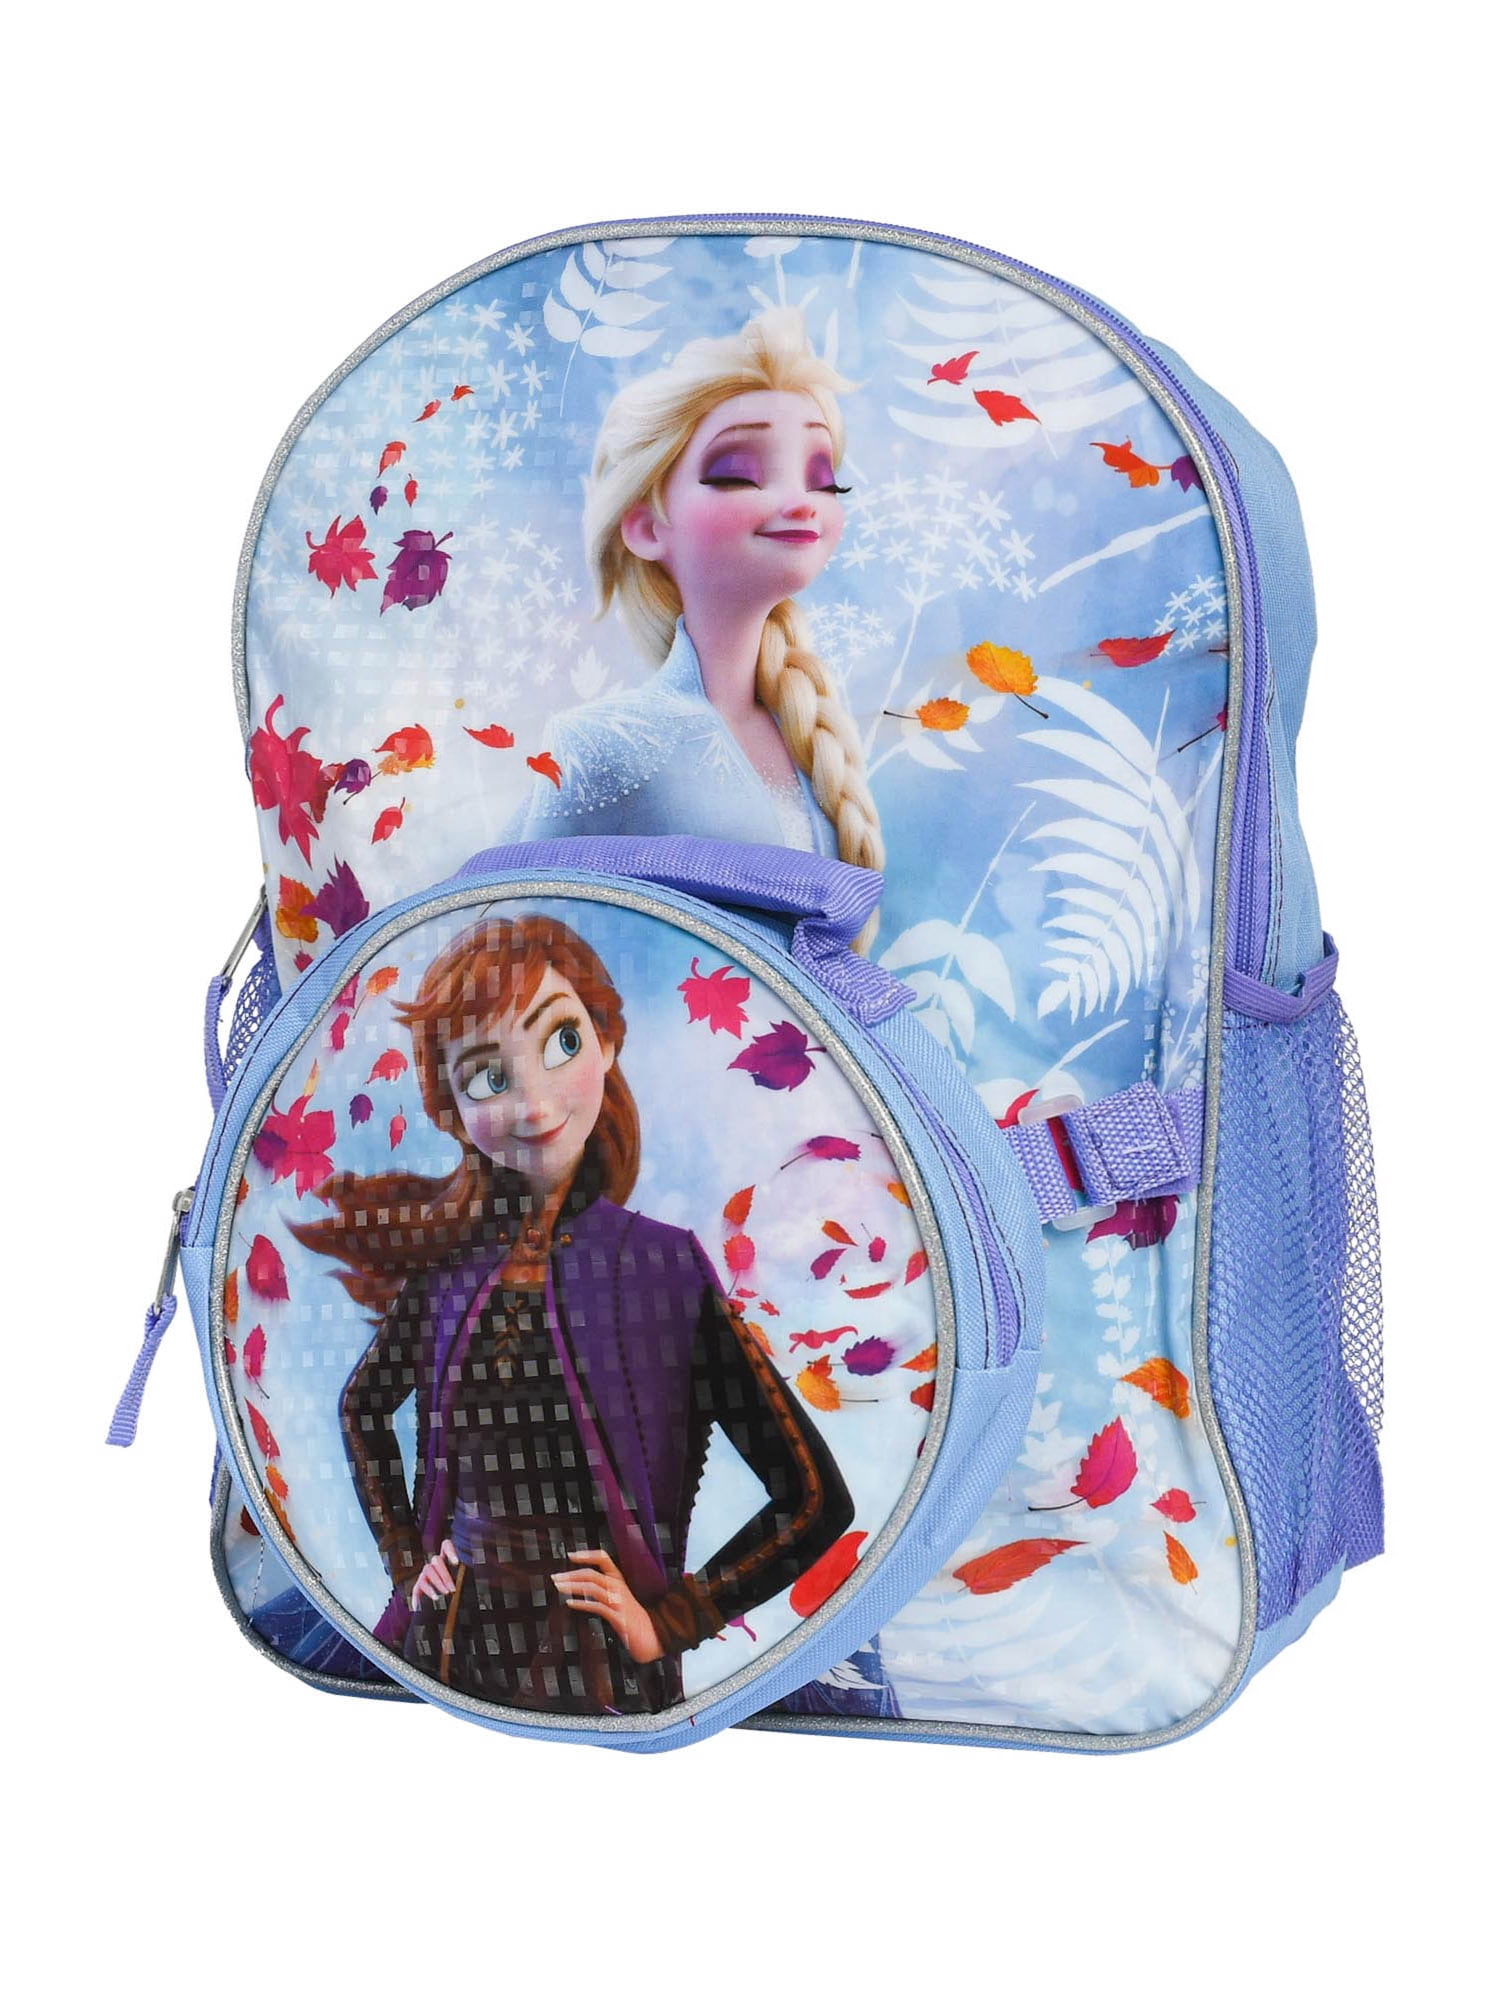 16 Inch Personalized Licensed Disneys Frozen 2 Character Backpack